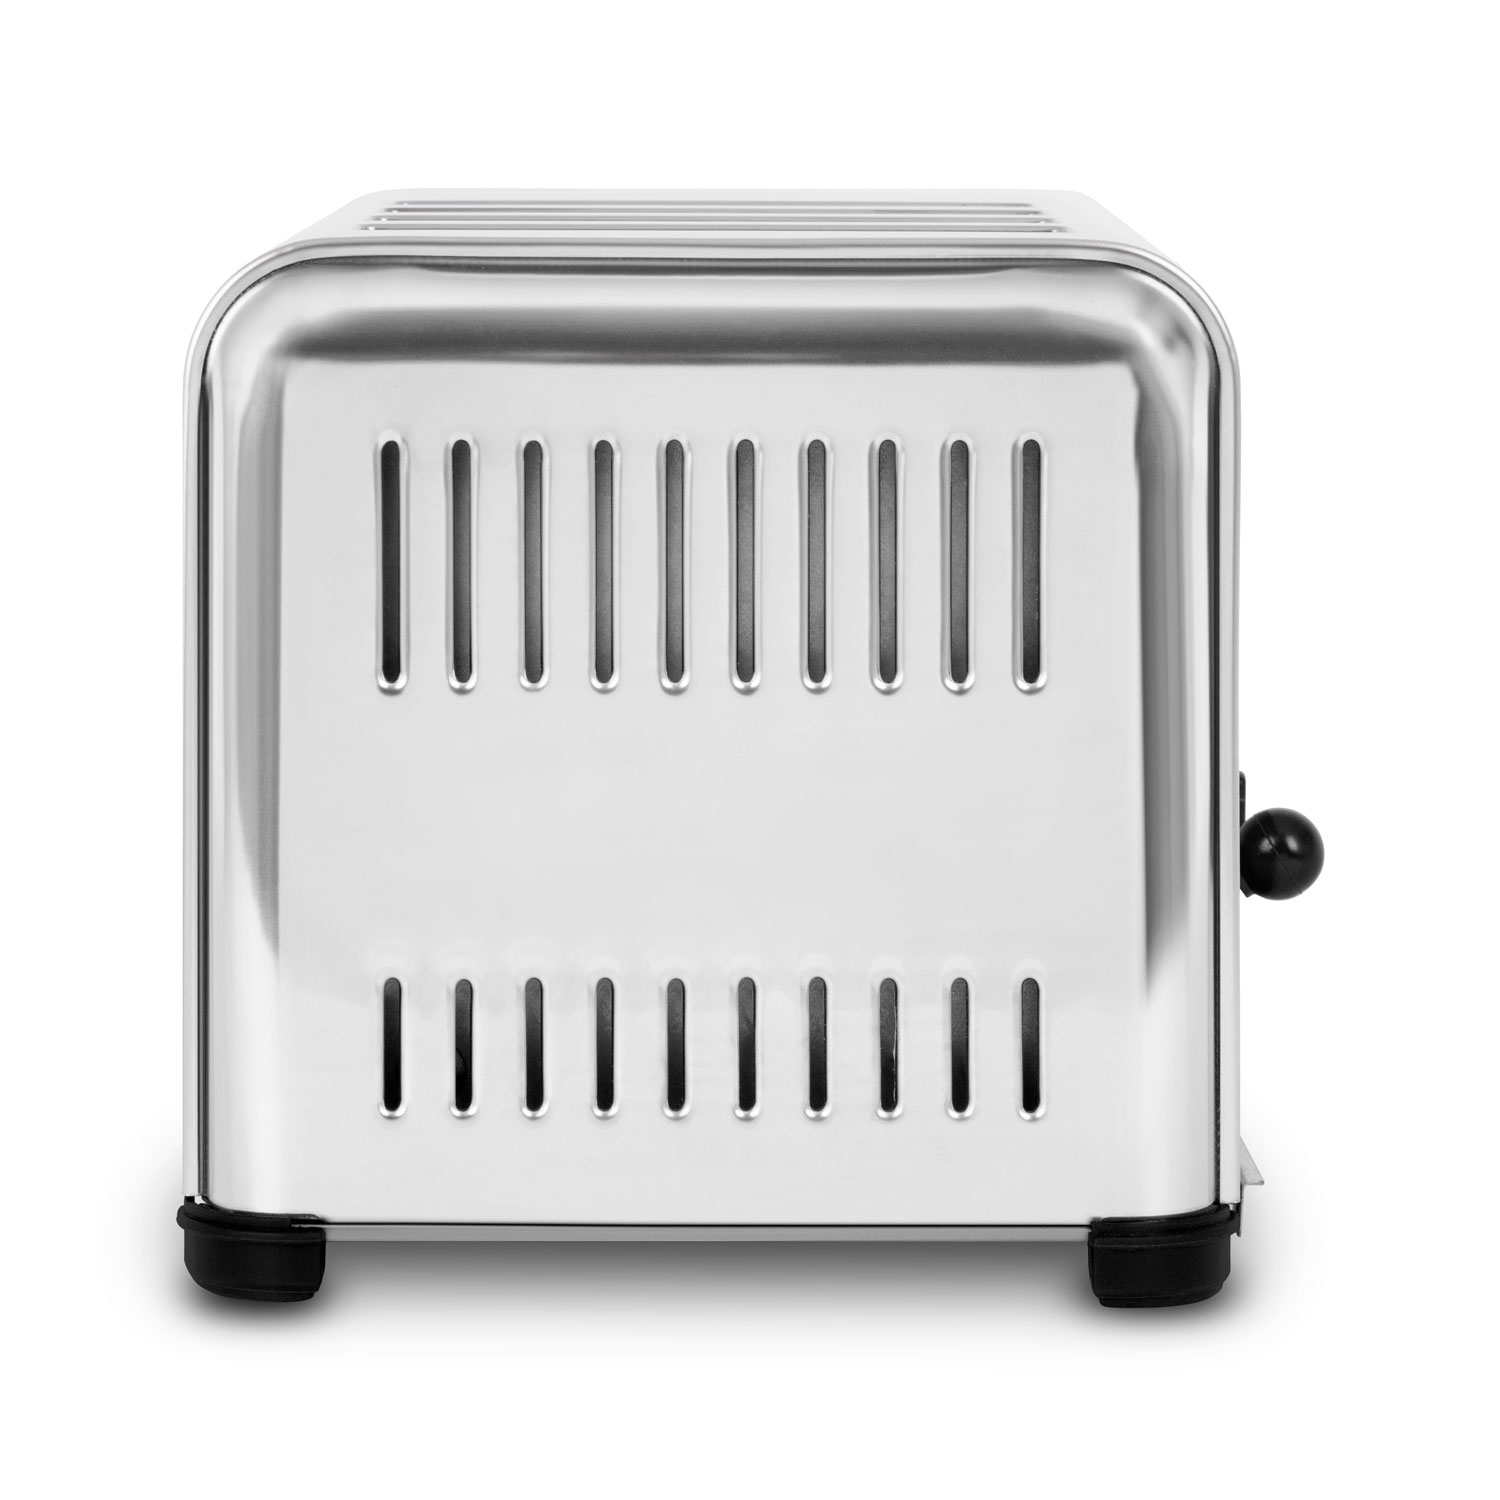 Grille-pain professionnel - 7240 - Milan Toast - 4 tranches